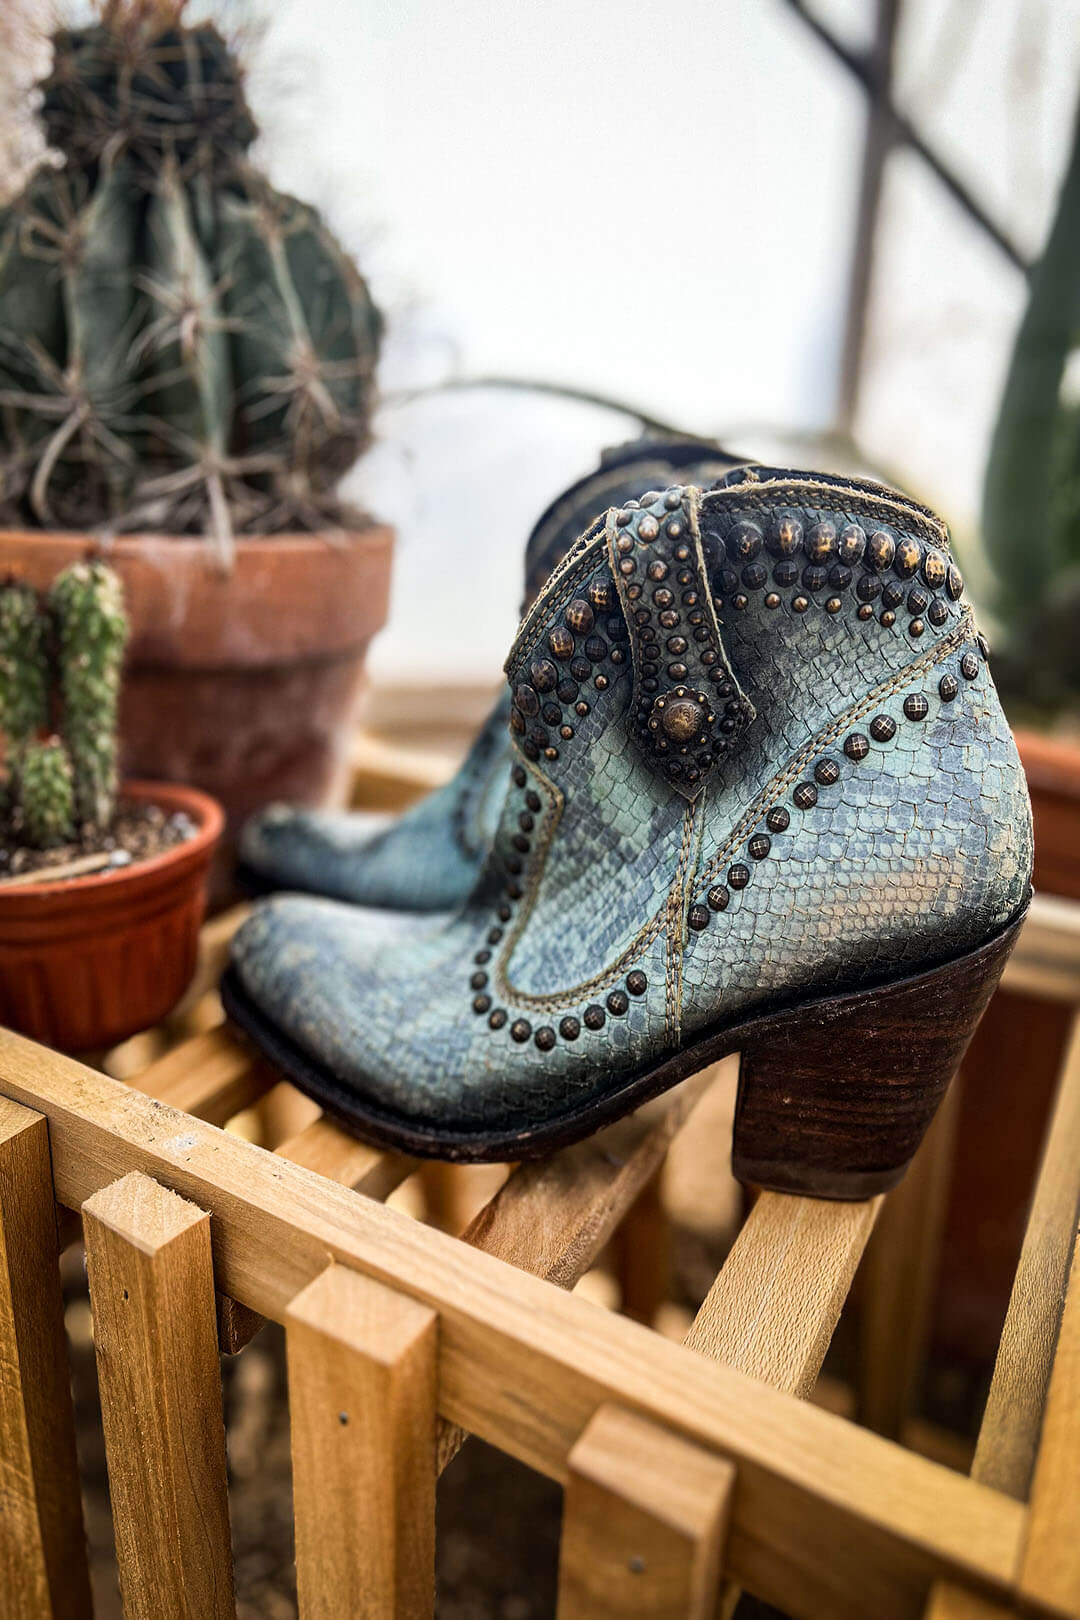 Image of the Snakeskin Boots by Liberty Black.  The shoes have stud detail throughout.